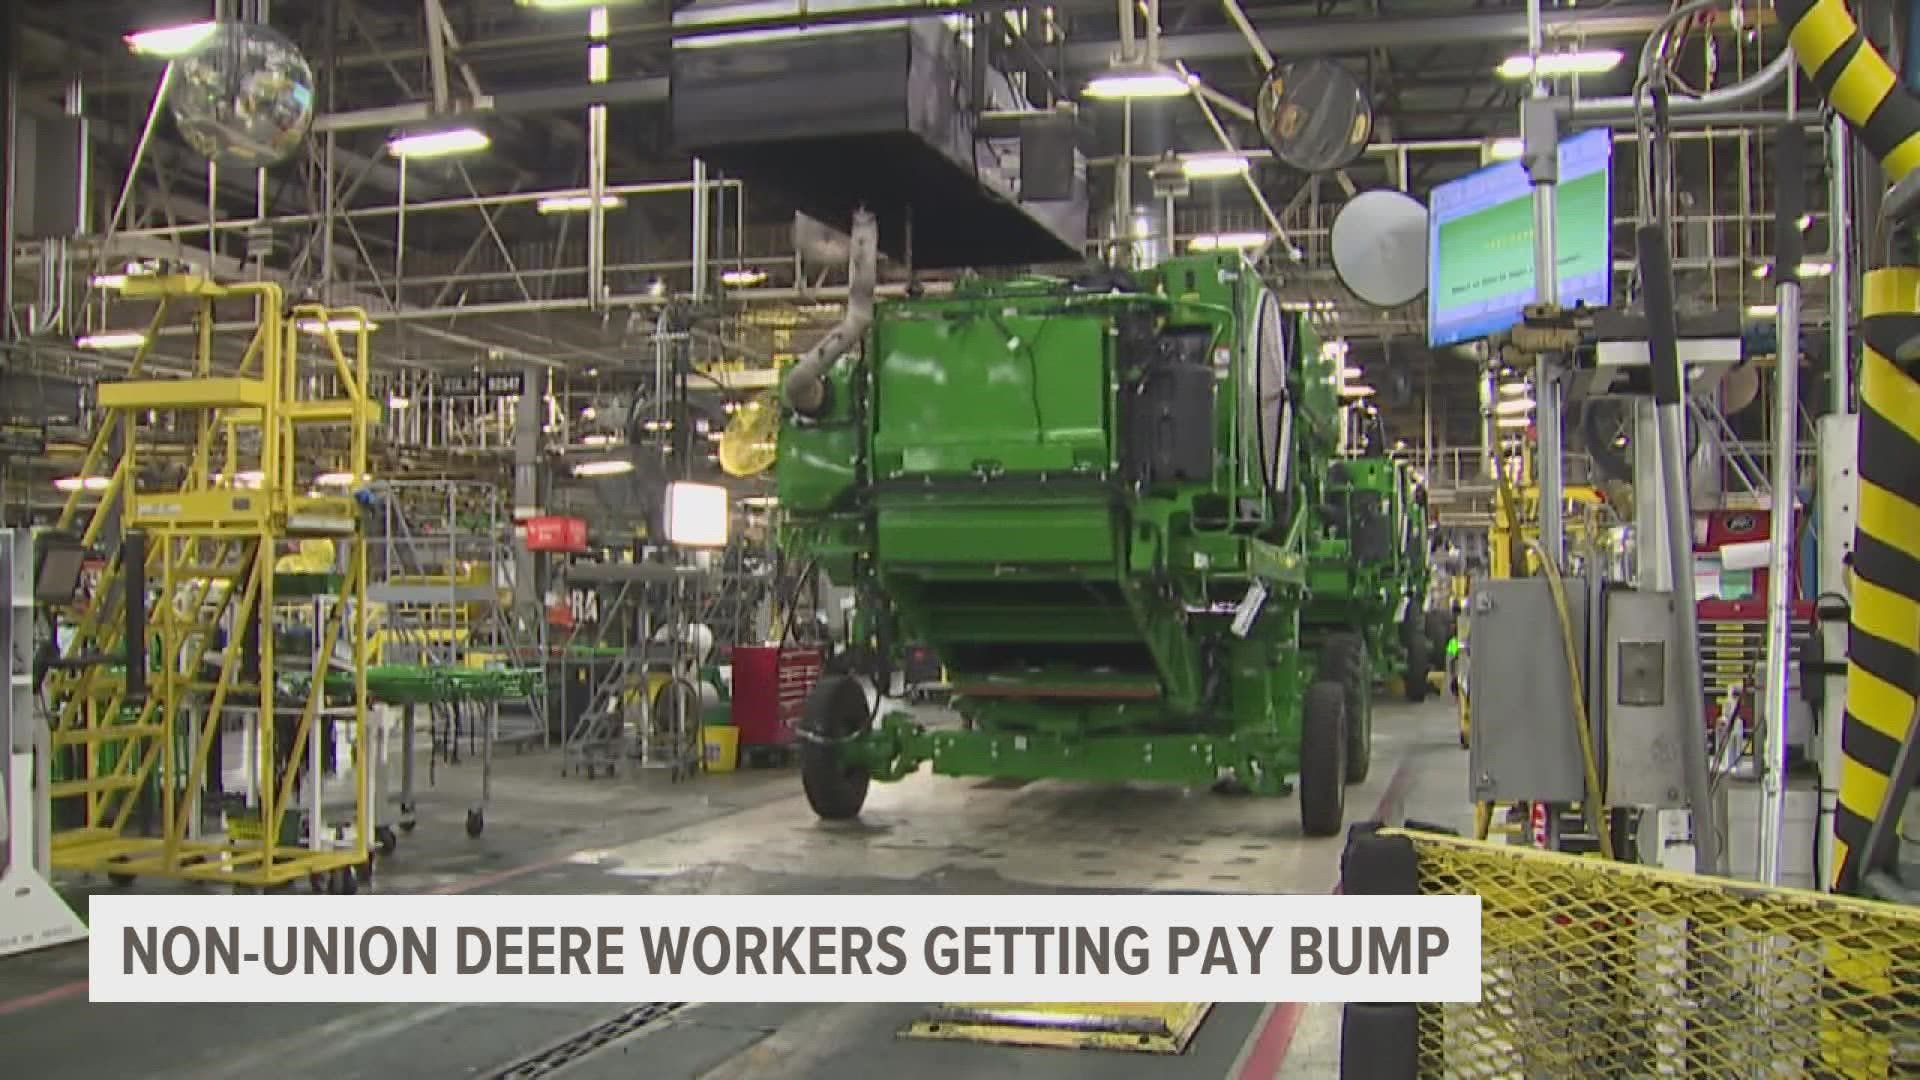 The company's non-union salaried employees will reportedly receive an 8% pay raise.